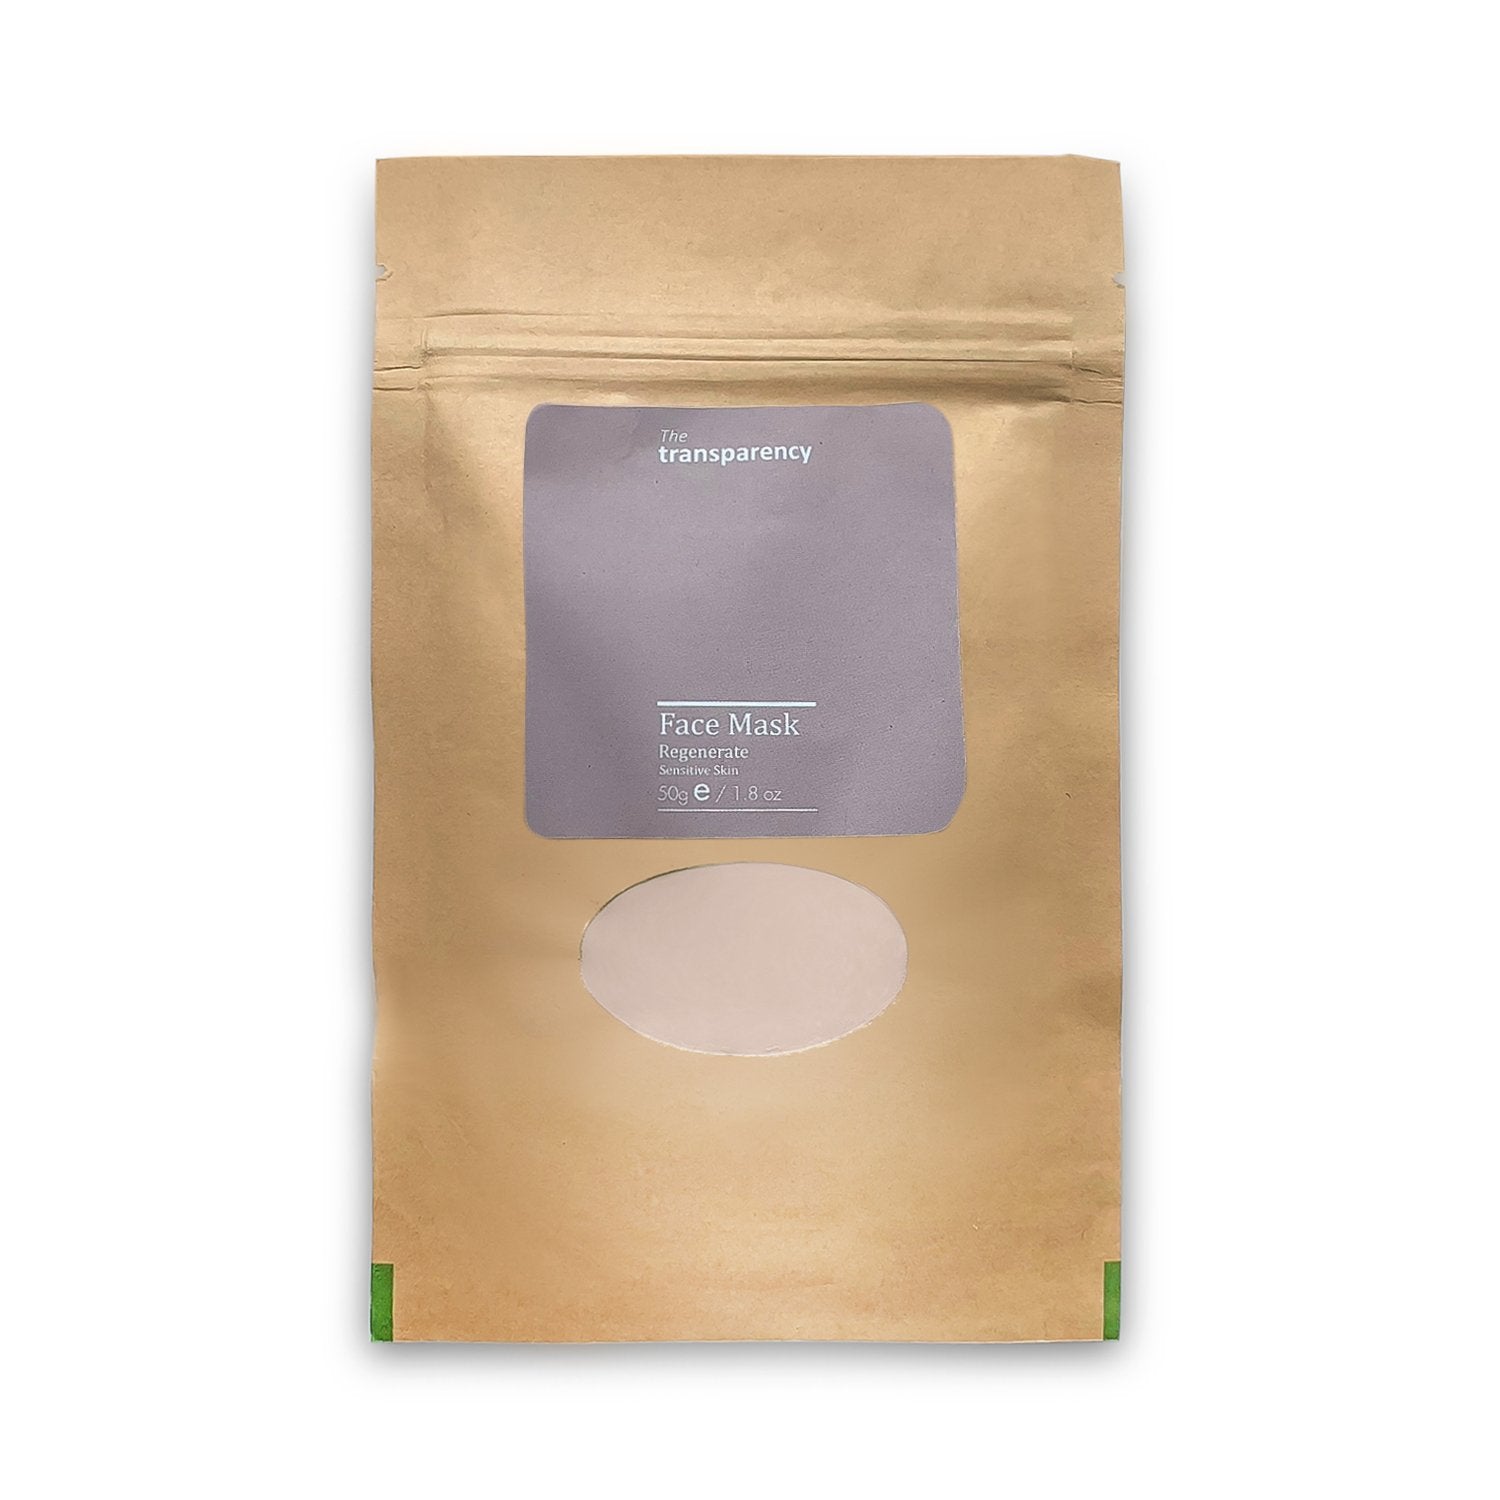 Regenerate Face Clay Mask - Sensitive Skin Pink Clay- The transparency